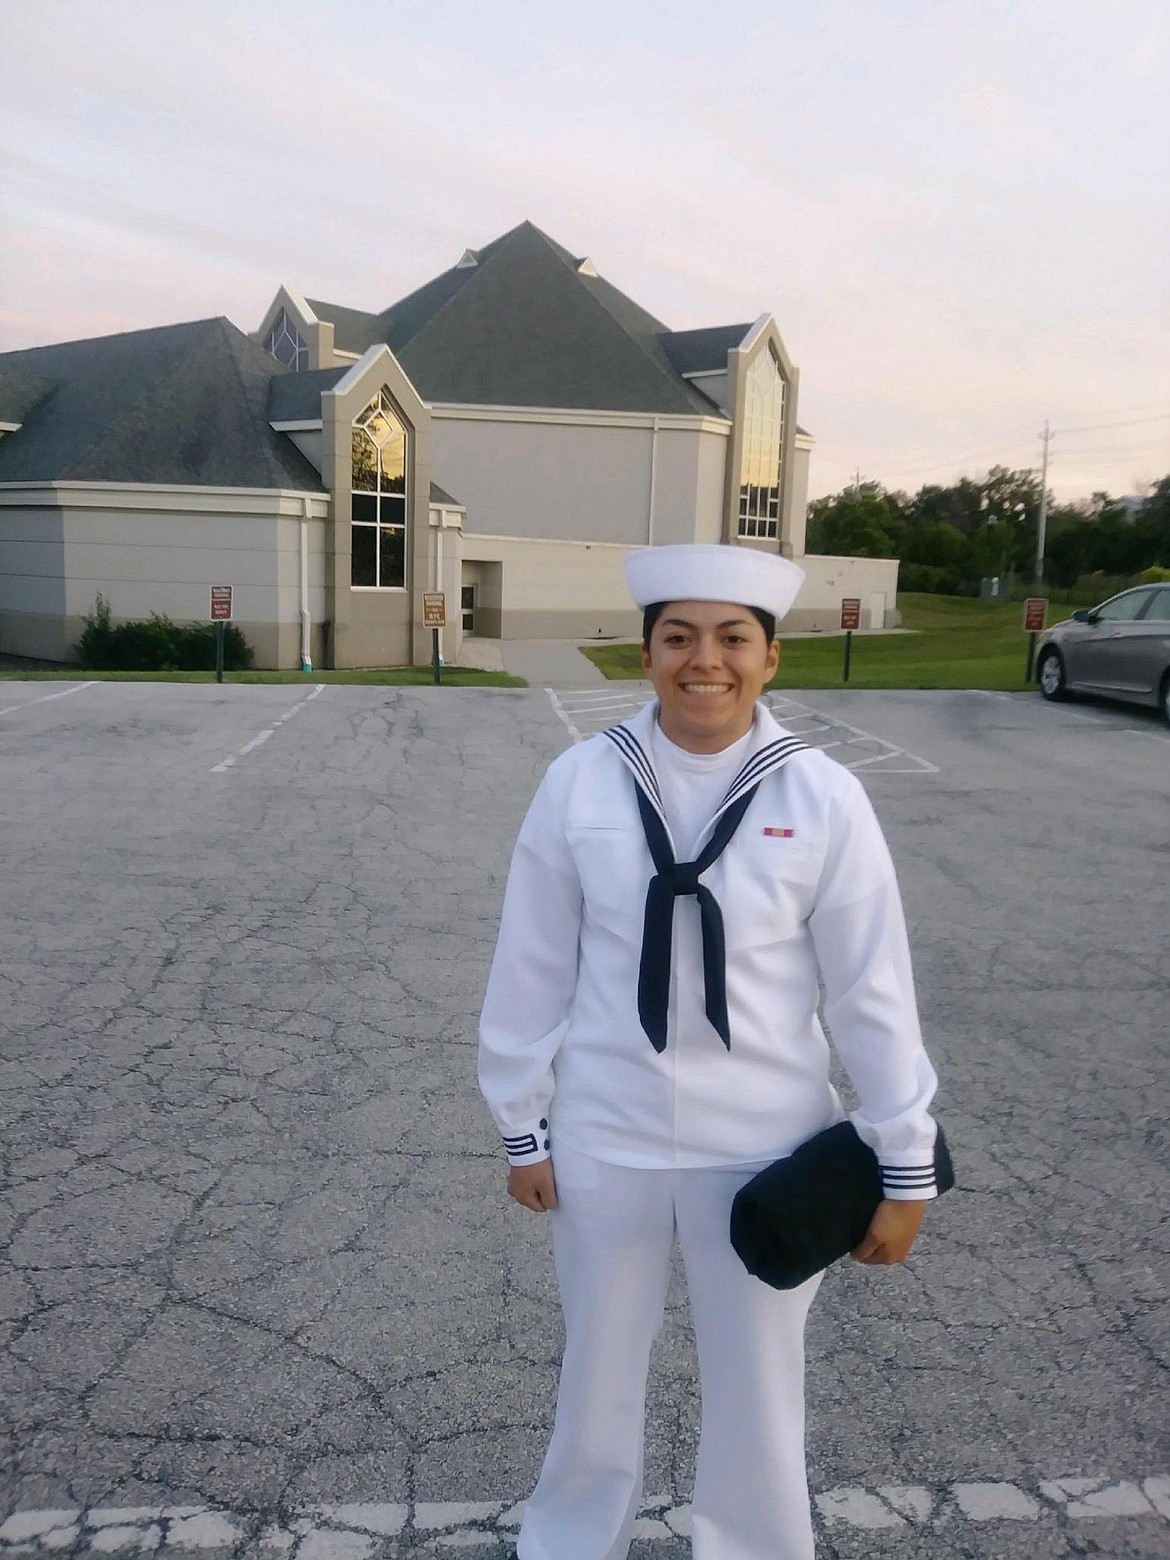 Julia Gutierrez-Carsten smiles in her dress uniform after graduating from her basic training at the Great Lakes Naval Training Center north of Chicago on Aug. 30, 2019.